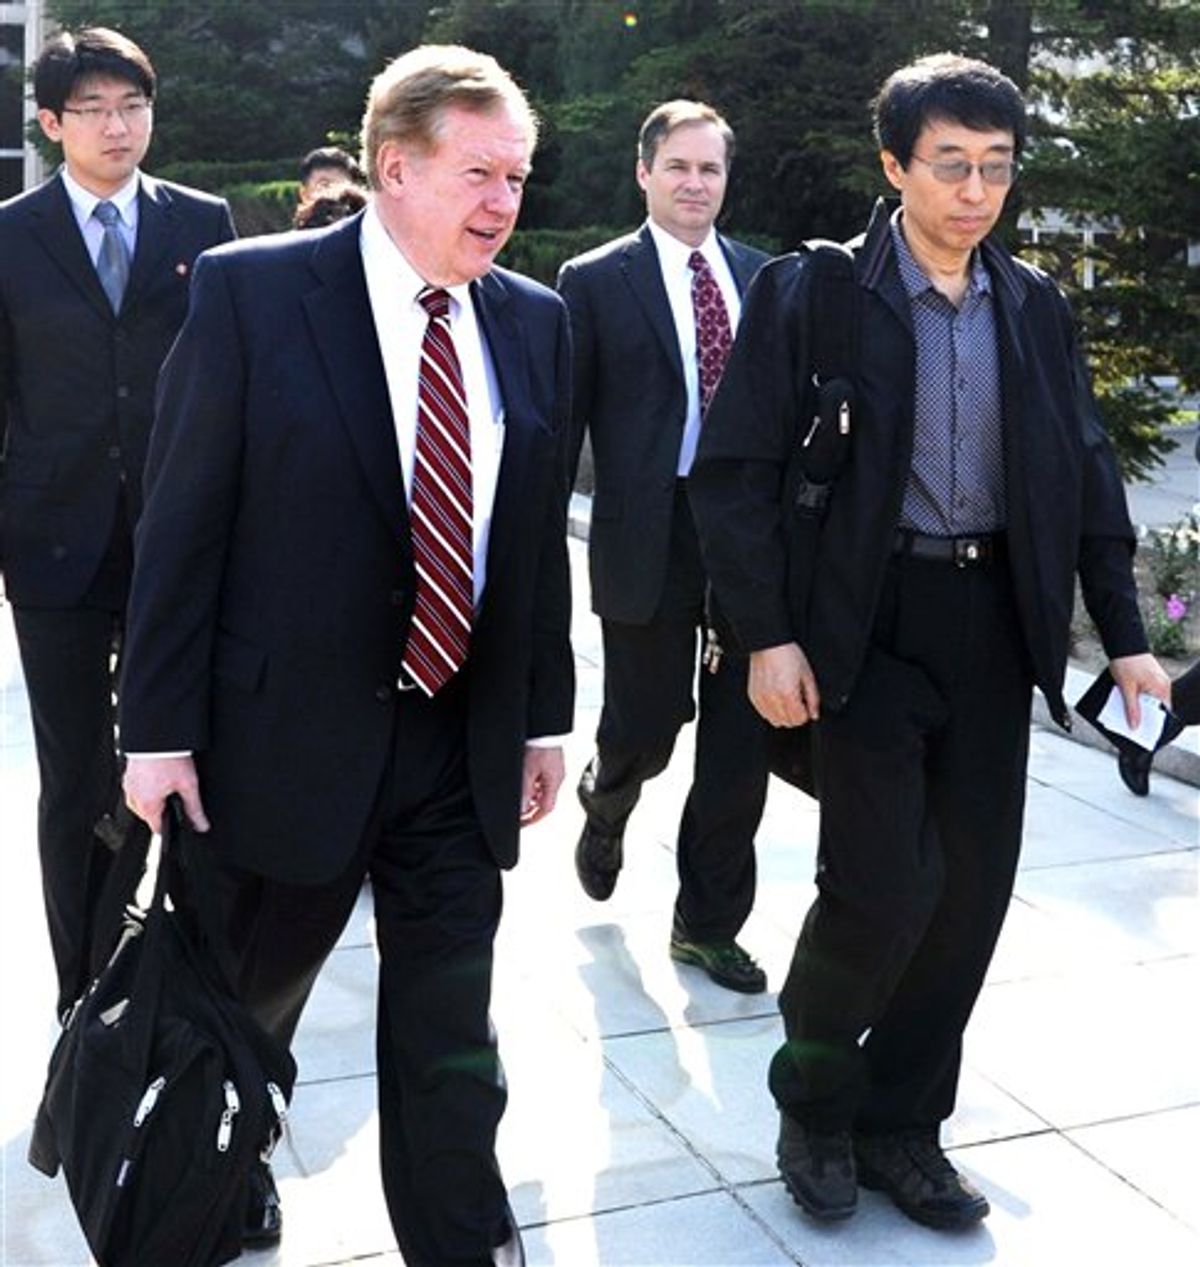 Robert King, left, U.S. special envoy for North Korean human rights issues, and U.S. citizen Eddie Jun, right, prepare to leave Pyongyang, North Korea, on Saturday May 28, 2011. The American held by North Korea for a half year reportedly for proselytizing is returning to the United States, brought out by the U.S. envoy who negotiated his release. (AP Photo/Kyodo News) JAPAN OUT, MANDATORY CREDIT, NO LICENSING IN CHINA, HONG KONG, JAPAN, SOUTH KOREA AND FRANCE (AP)